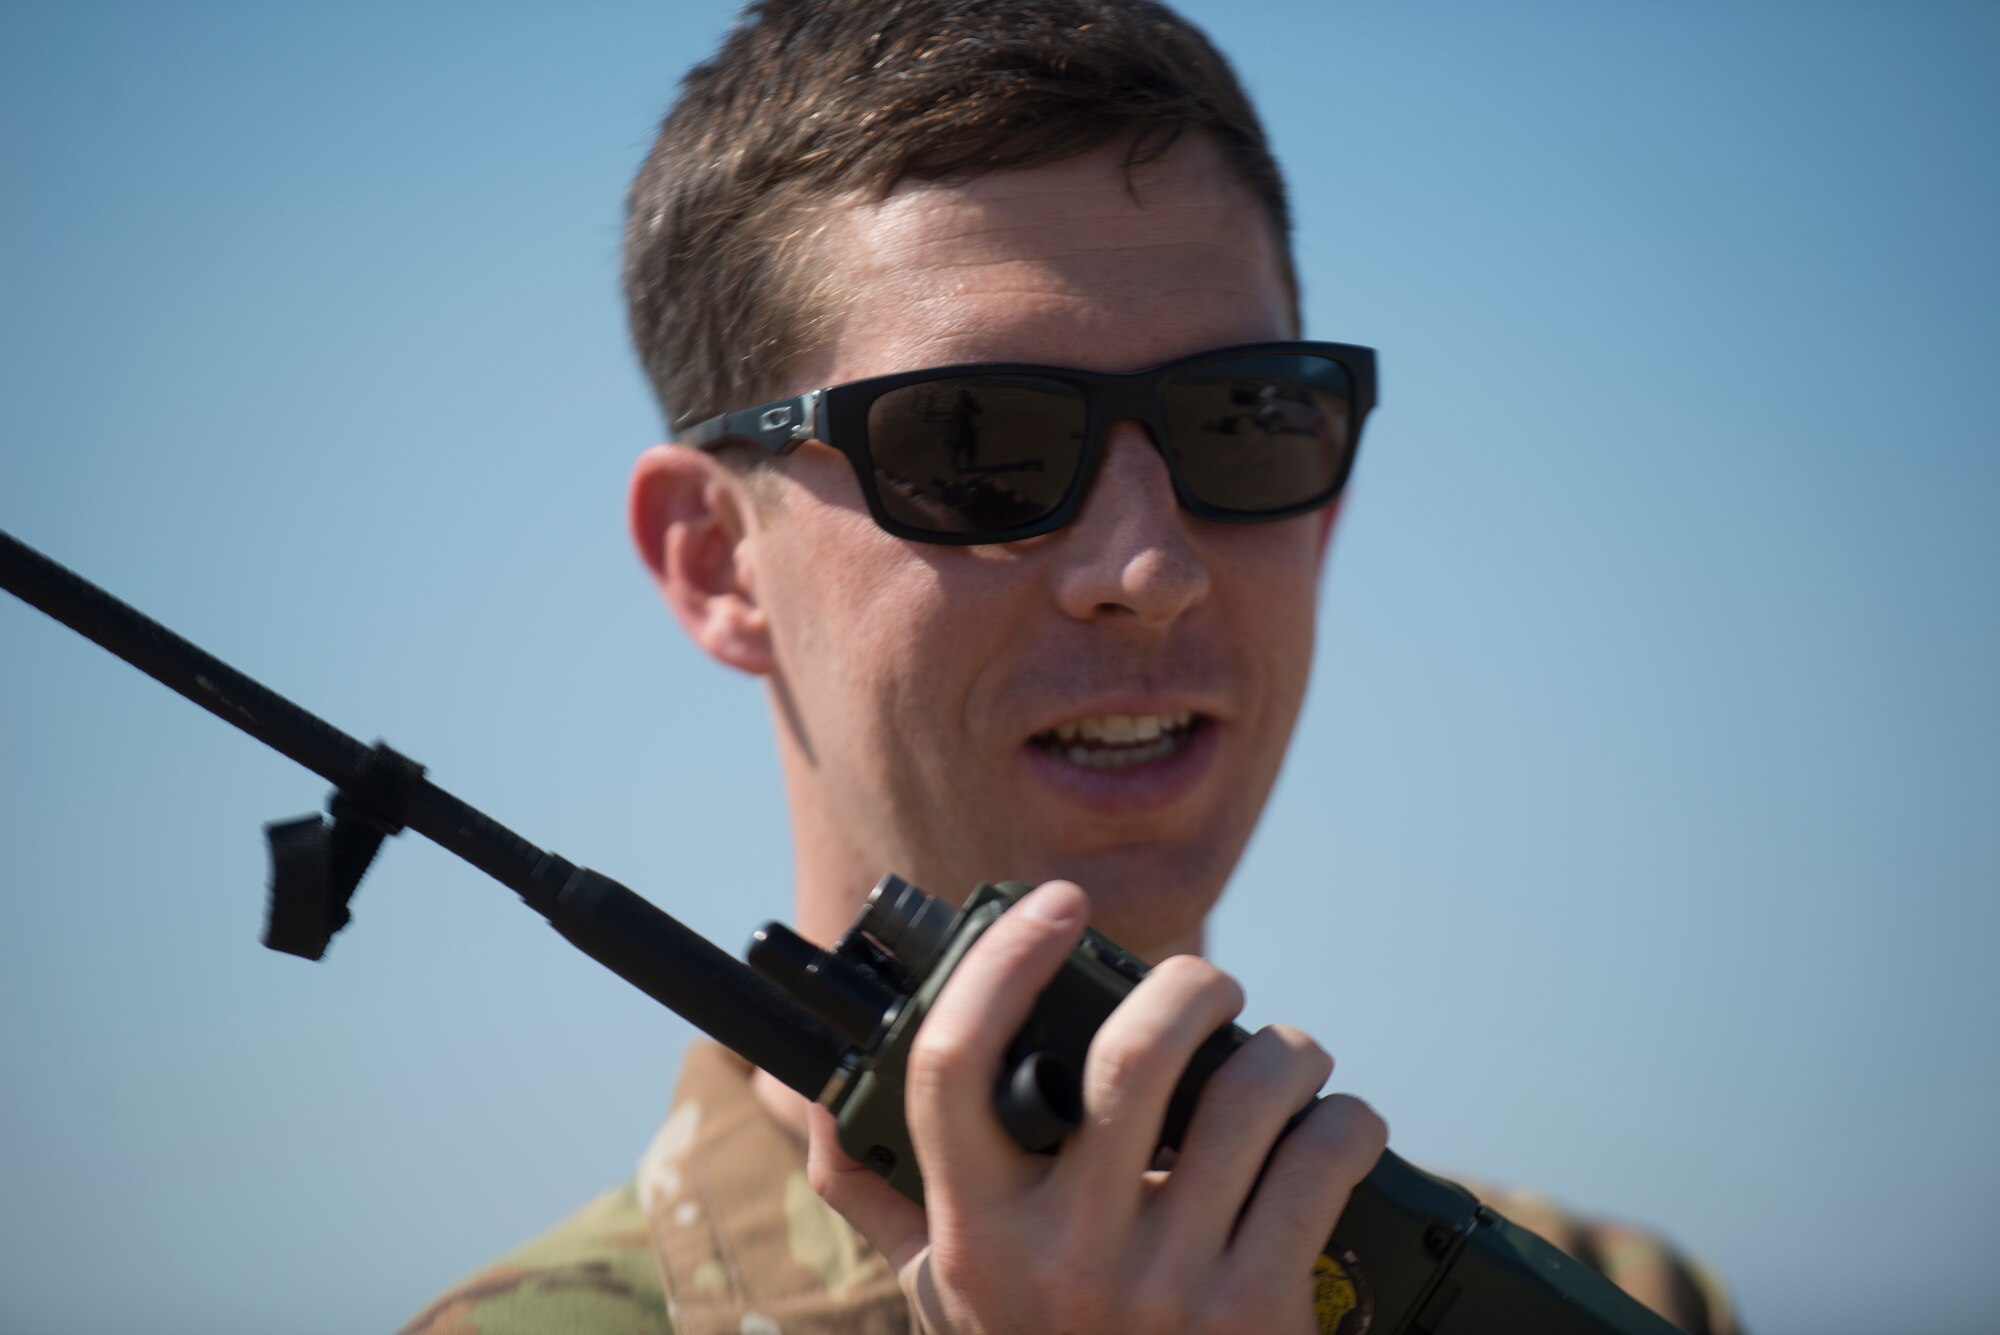 An Airman relays information on a radio.